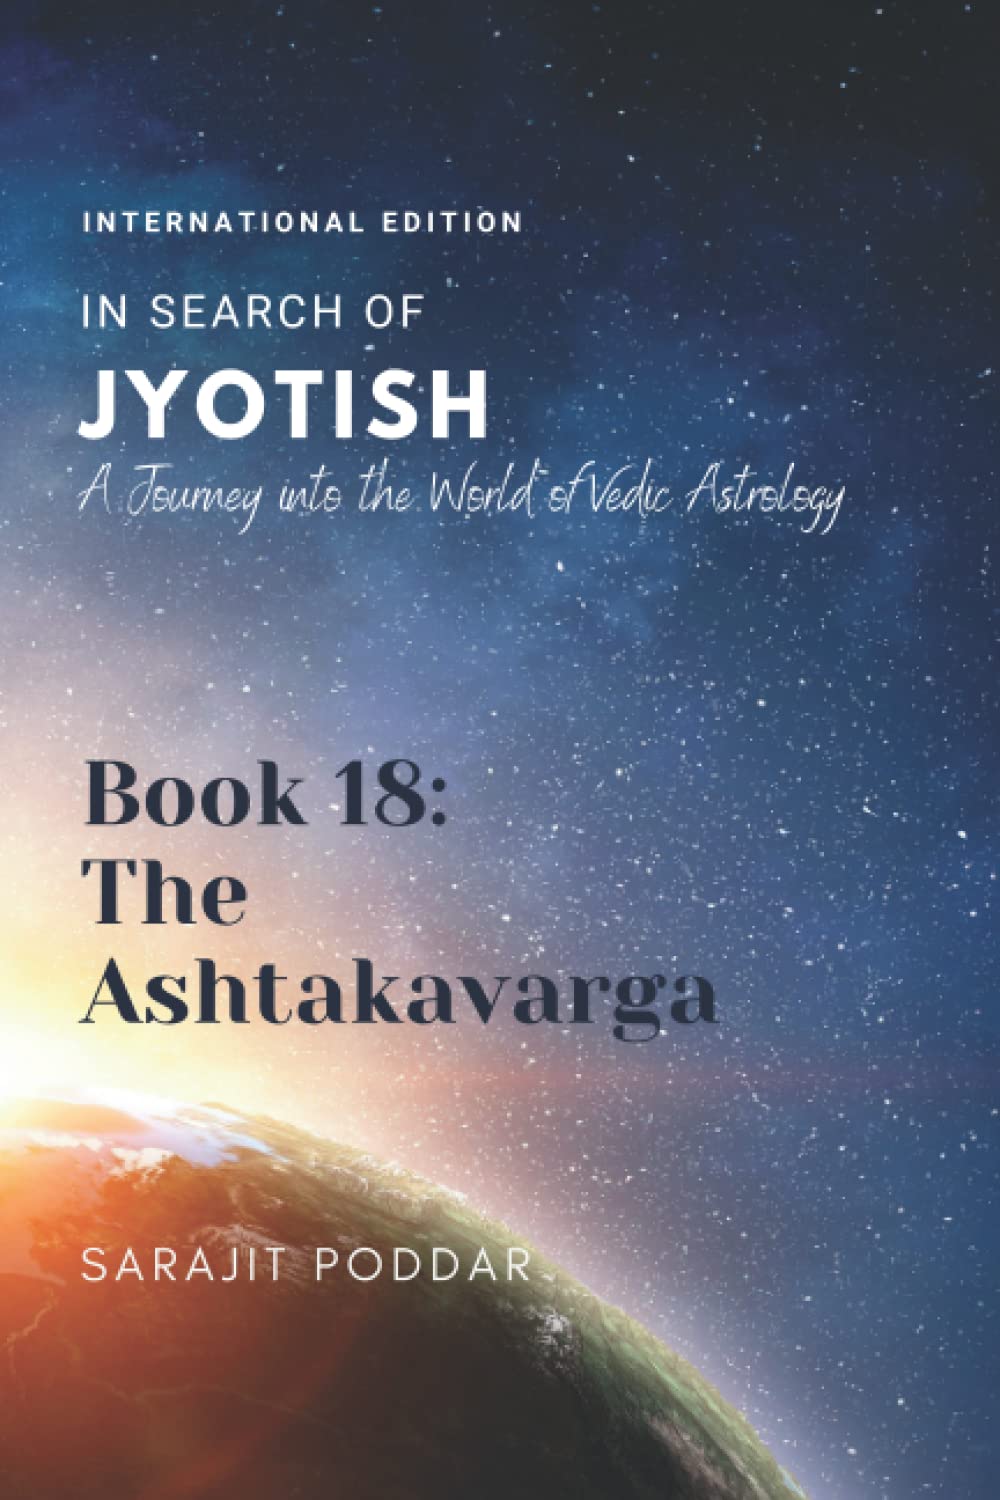 The Ashtakavarga: A Journey into the World of Vedic Astrology